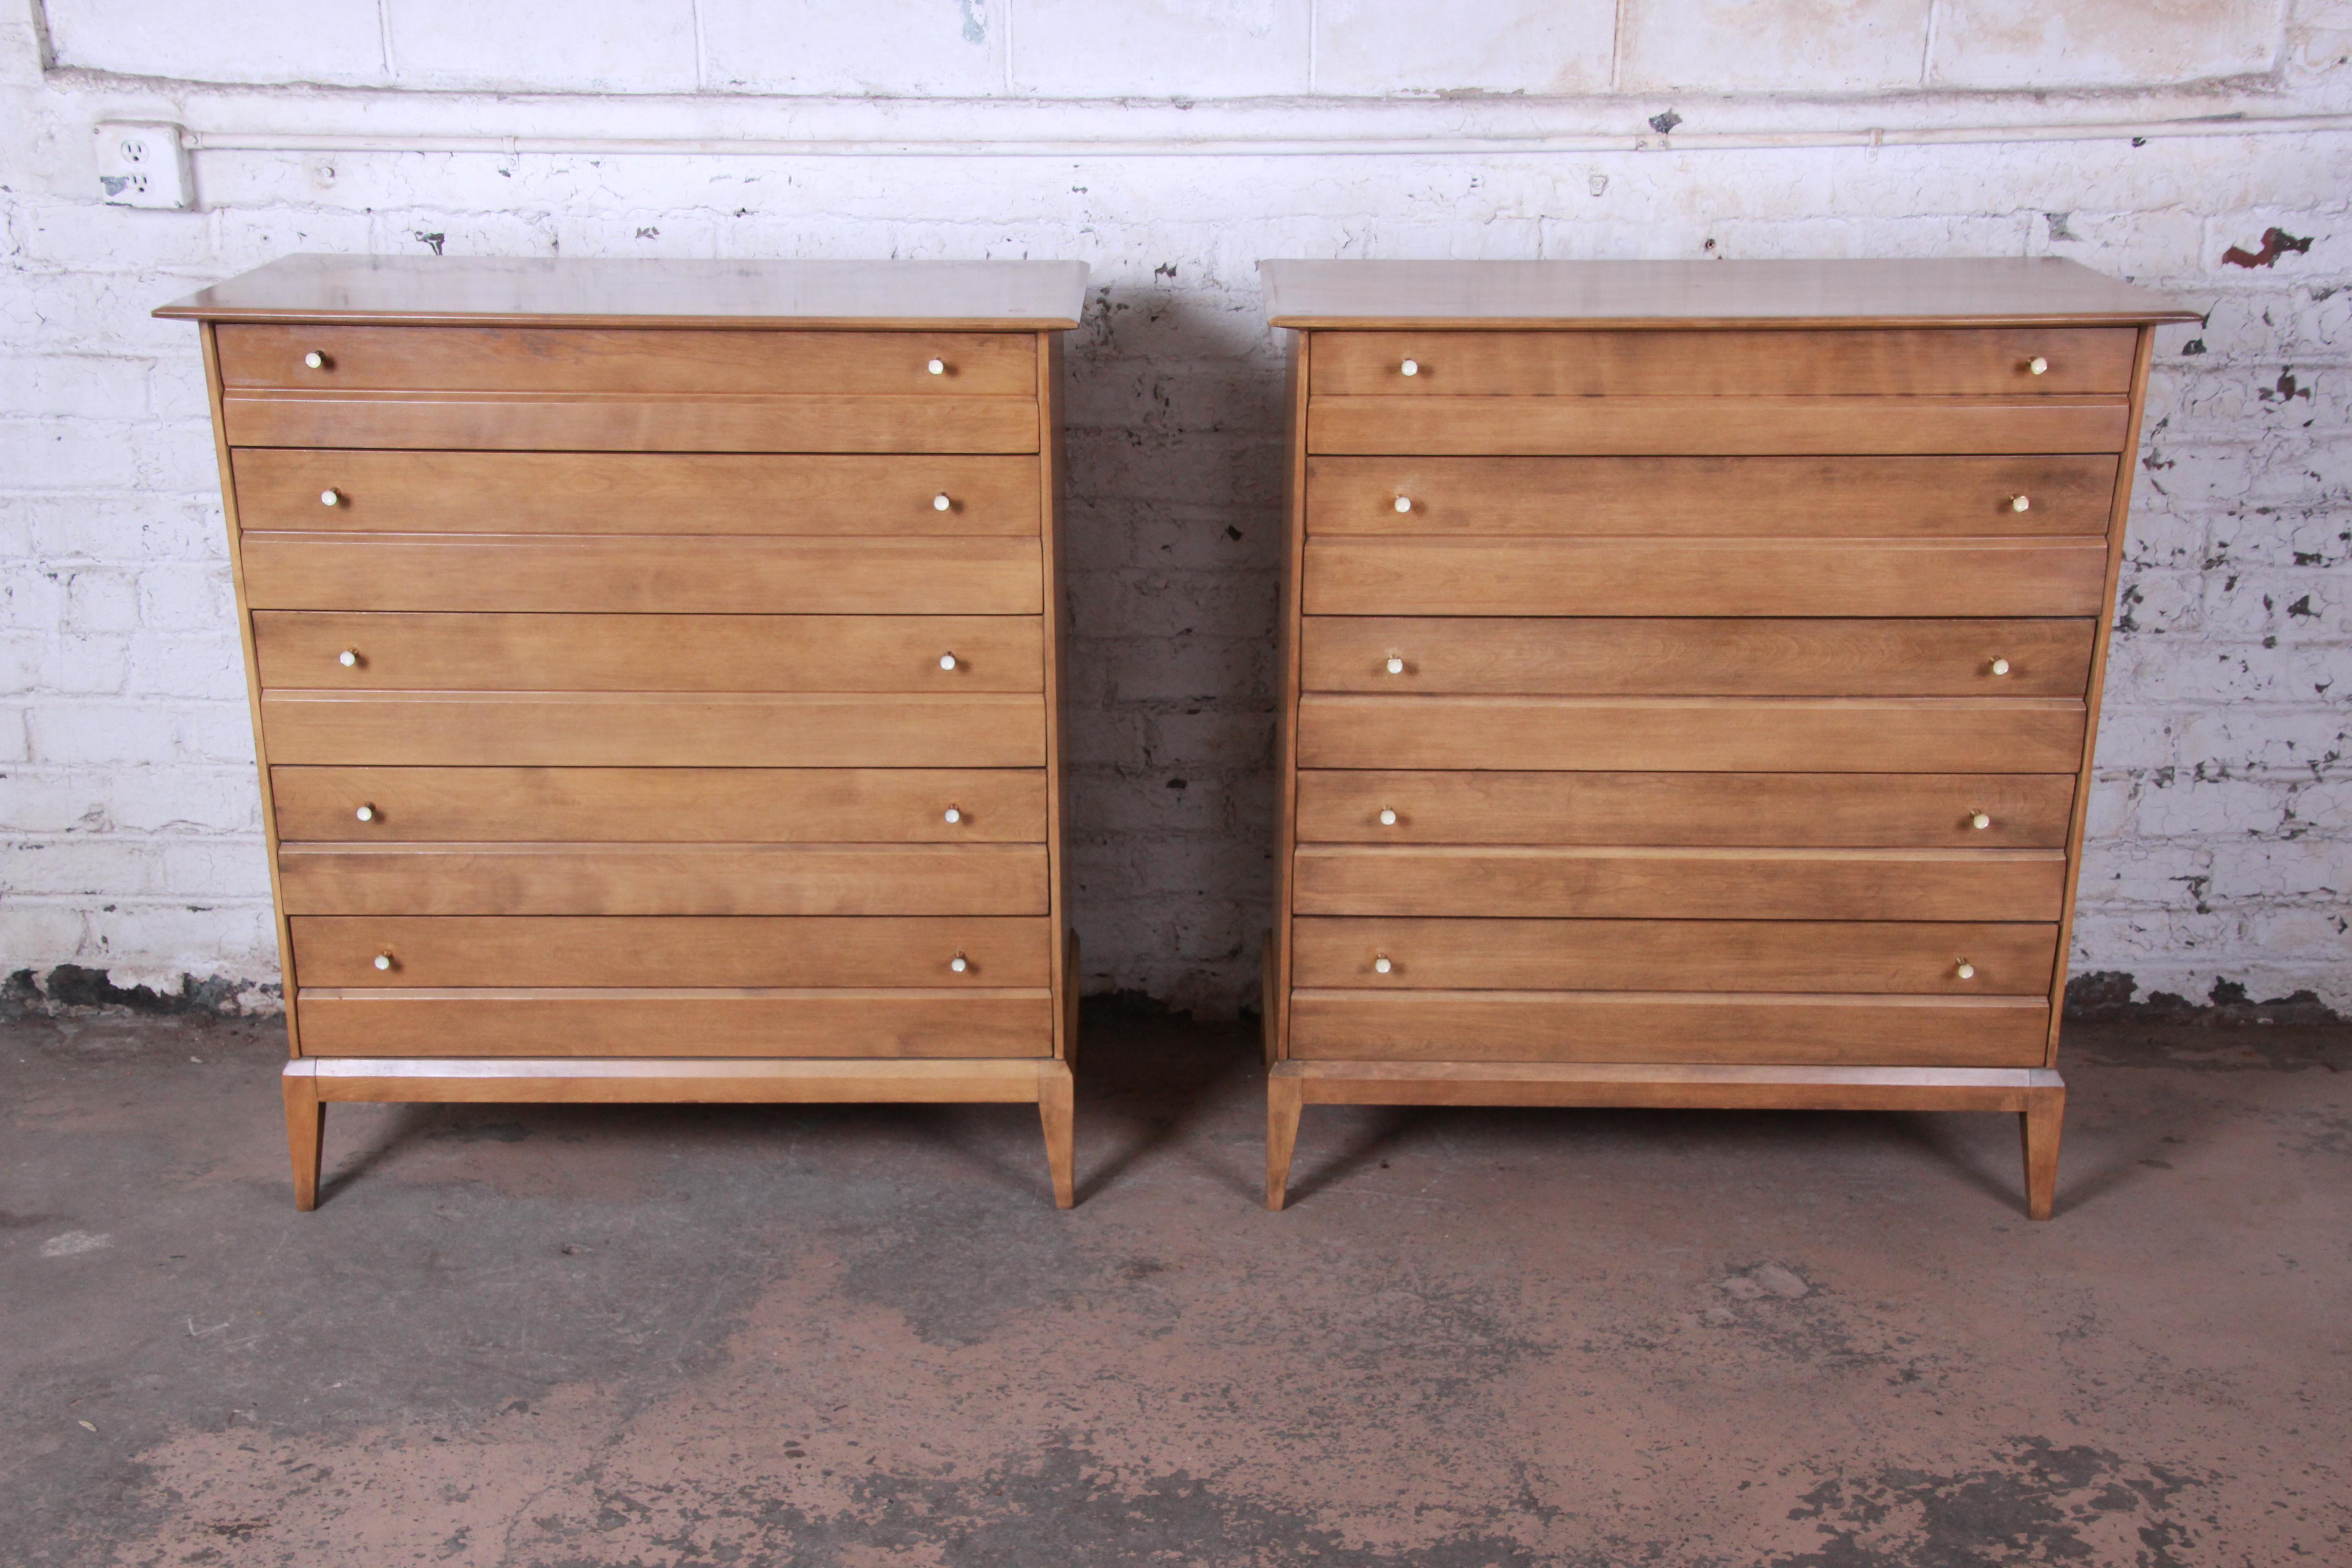 Offering a very nice pair of Mid-Century Modern Heywood-Wakefield highboy dressers. Each dresser has five smooth sliding drawers that offers lots of room for storage. The dresser has nice modern tapered legs with midcentury lines. The dressers are